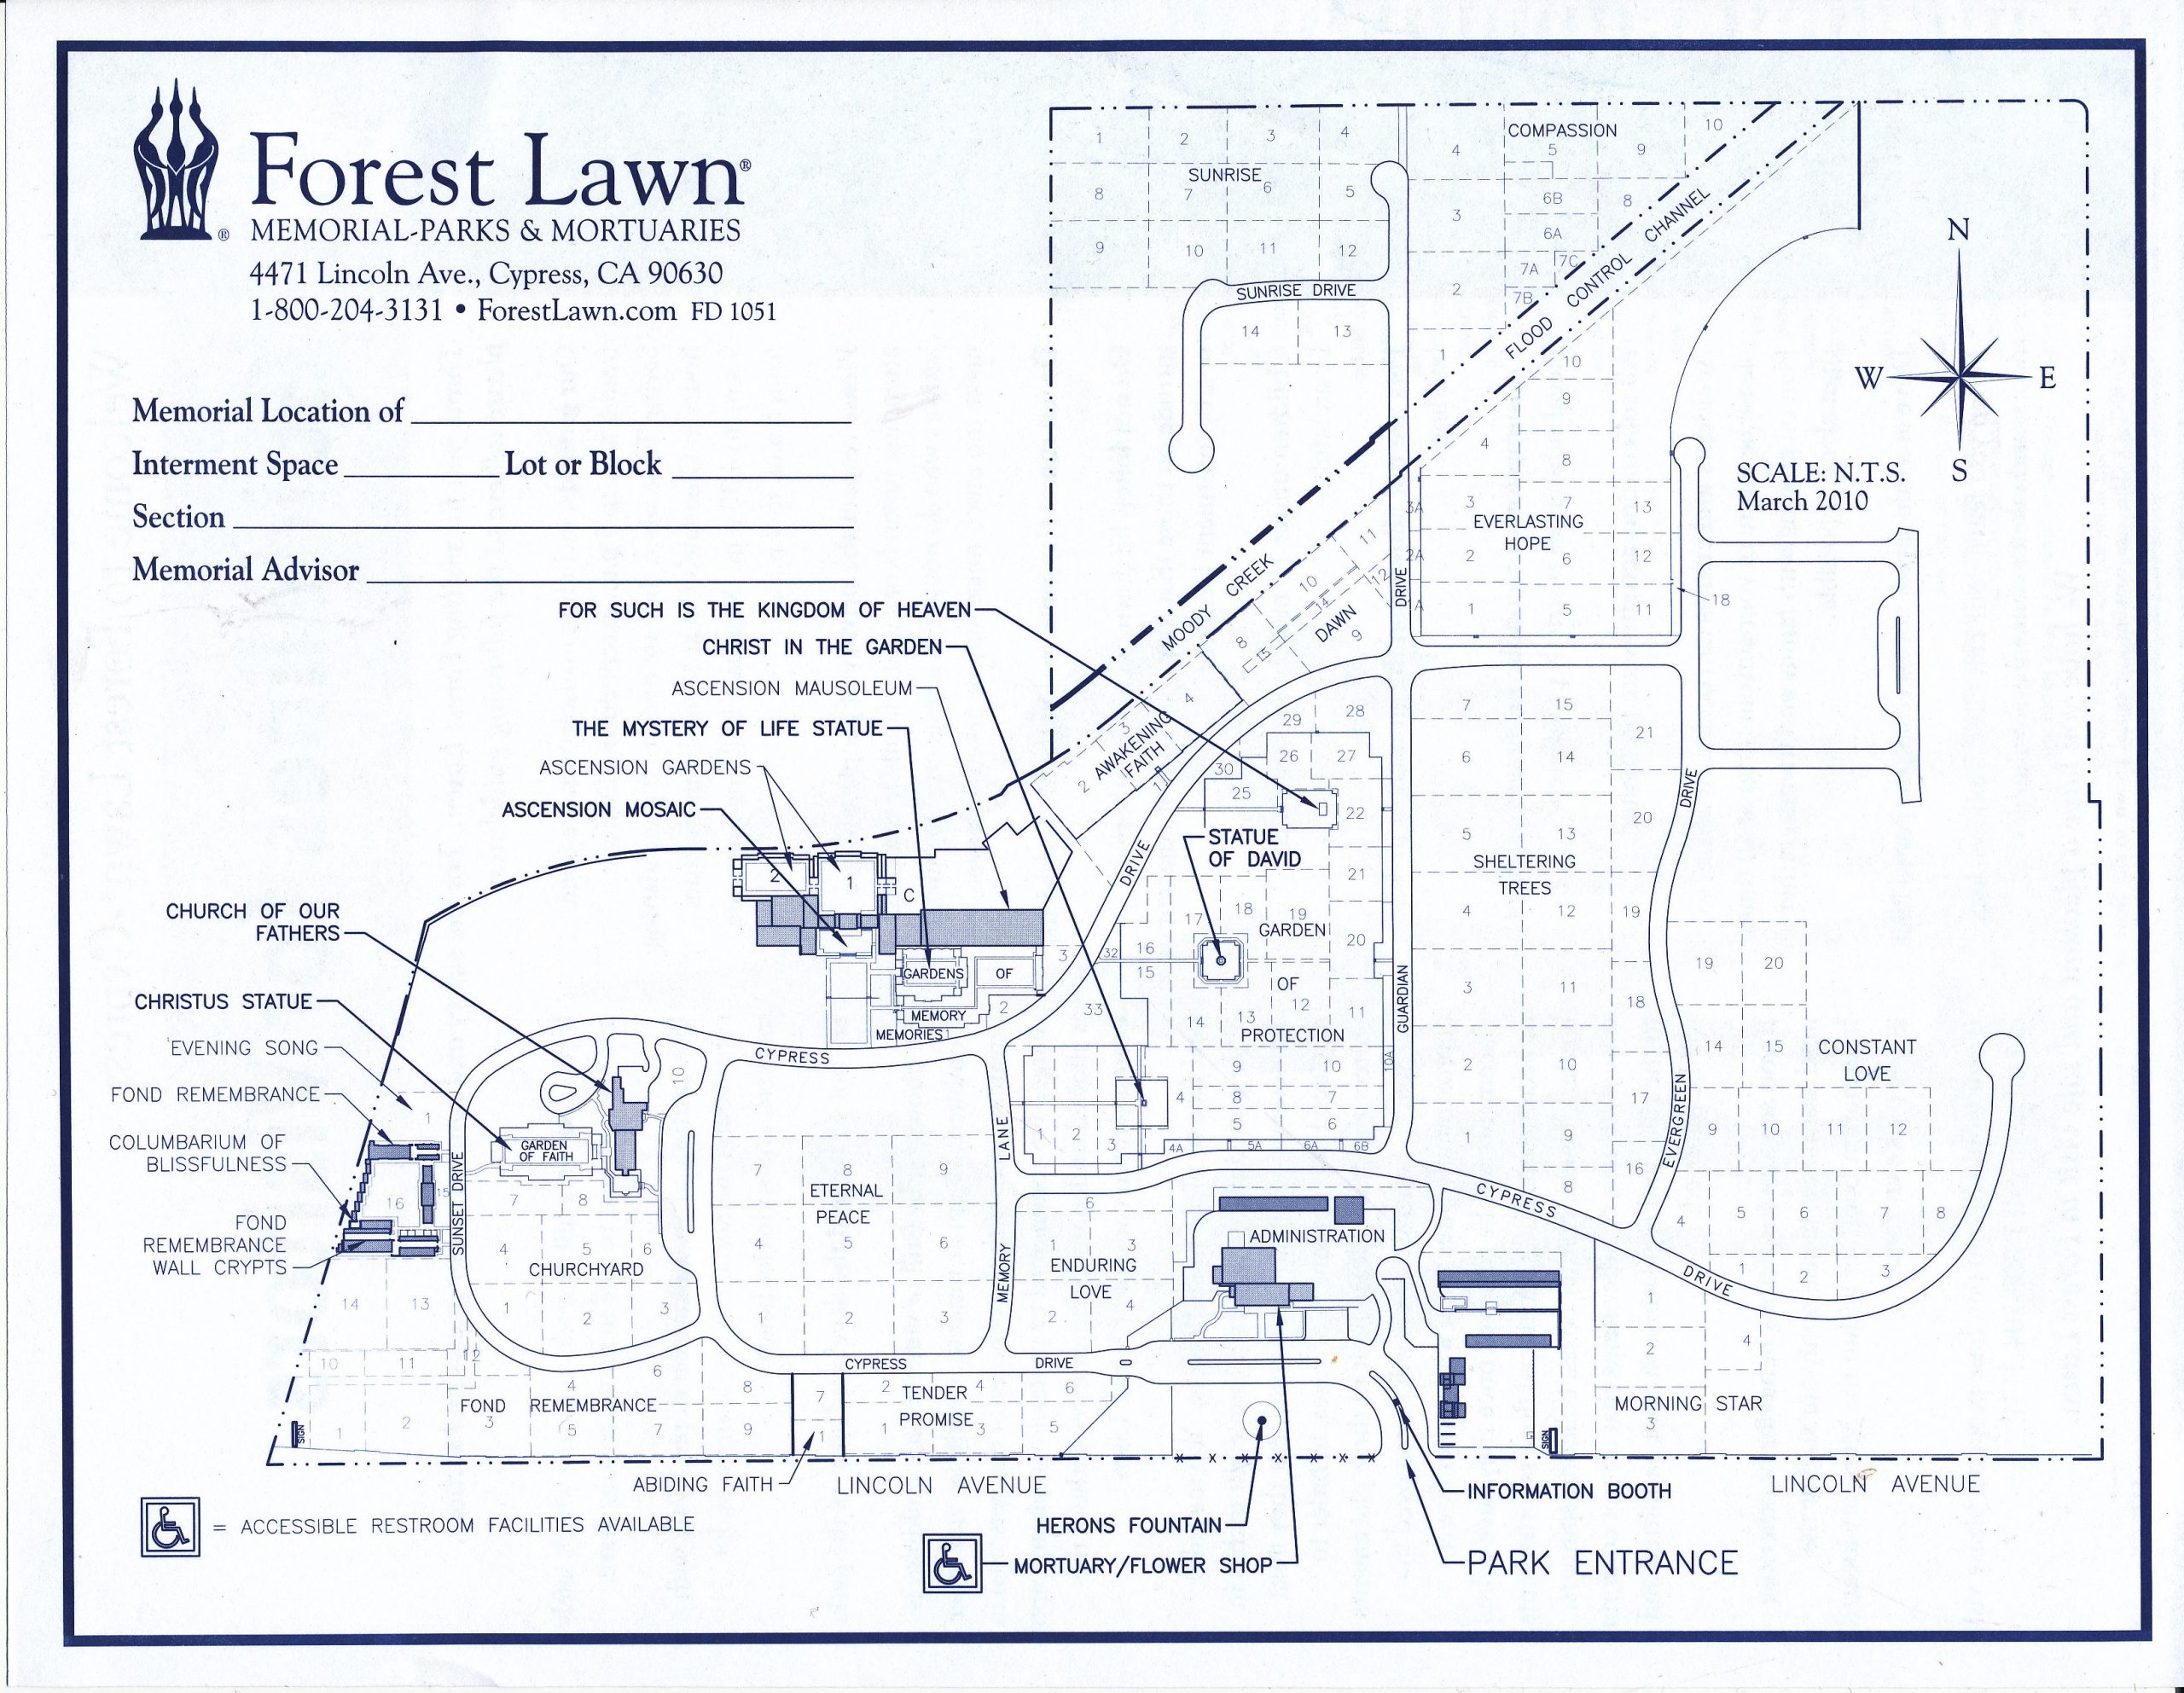 Map of Forest Lawn Memorial Park in Cypress, California